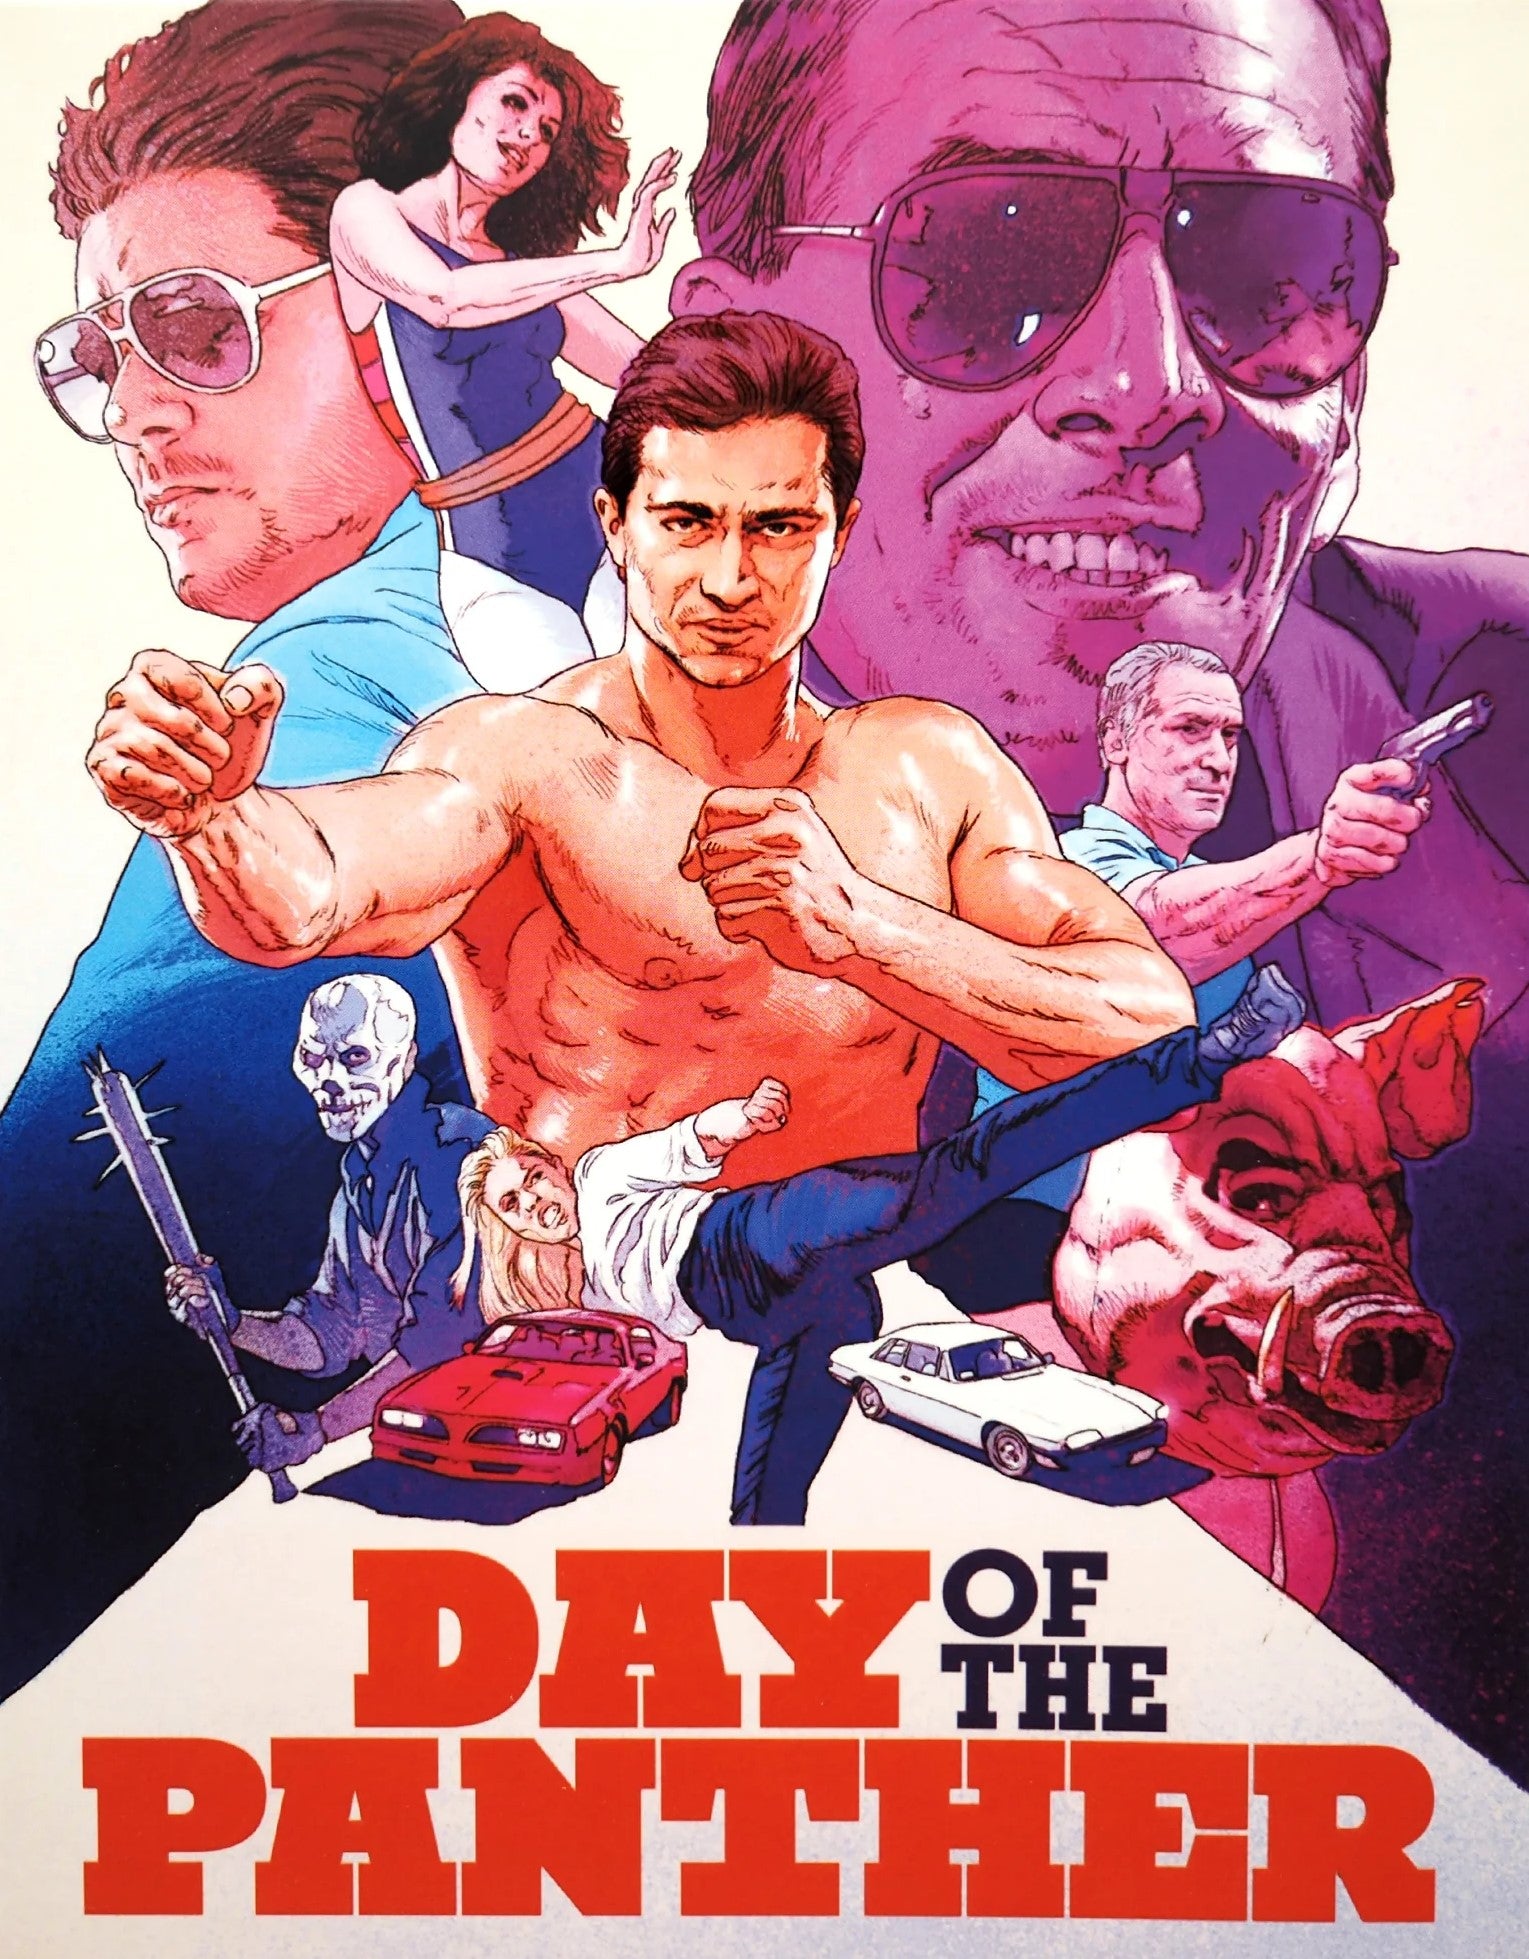 DAY OF THE PANTHER / STRIKE OF THE PANTHER (LIMITED EDITION) BLU-RAY